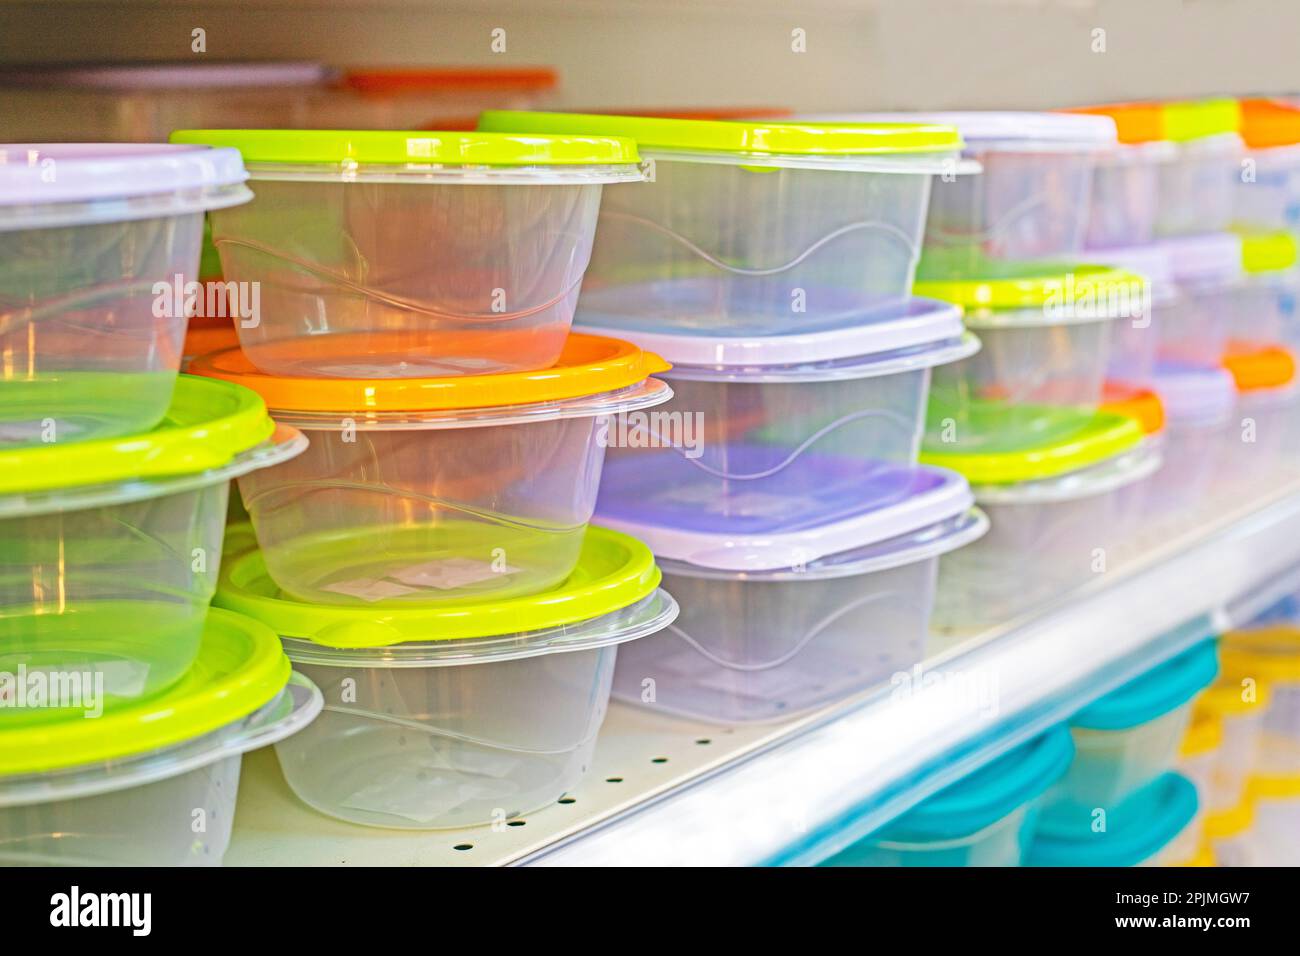 https://c8.alamy.com/comp/2PJMGW7/transparent-plastic-containers-with-colorful-lids-on-the-store-counter-horizontal-2PJMGW7.jpg